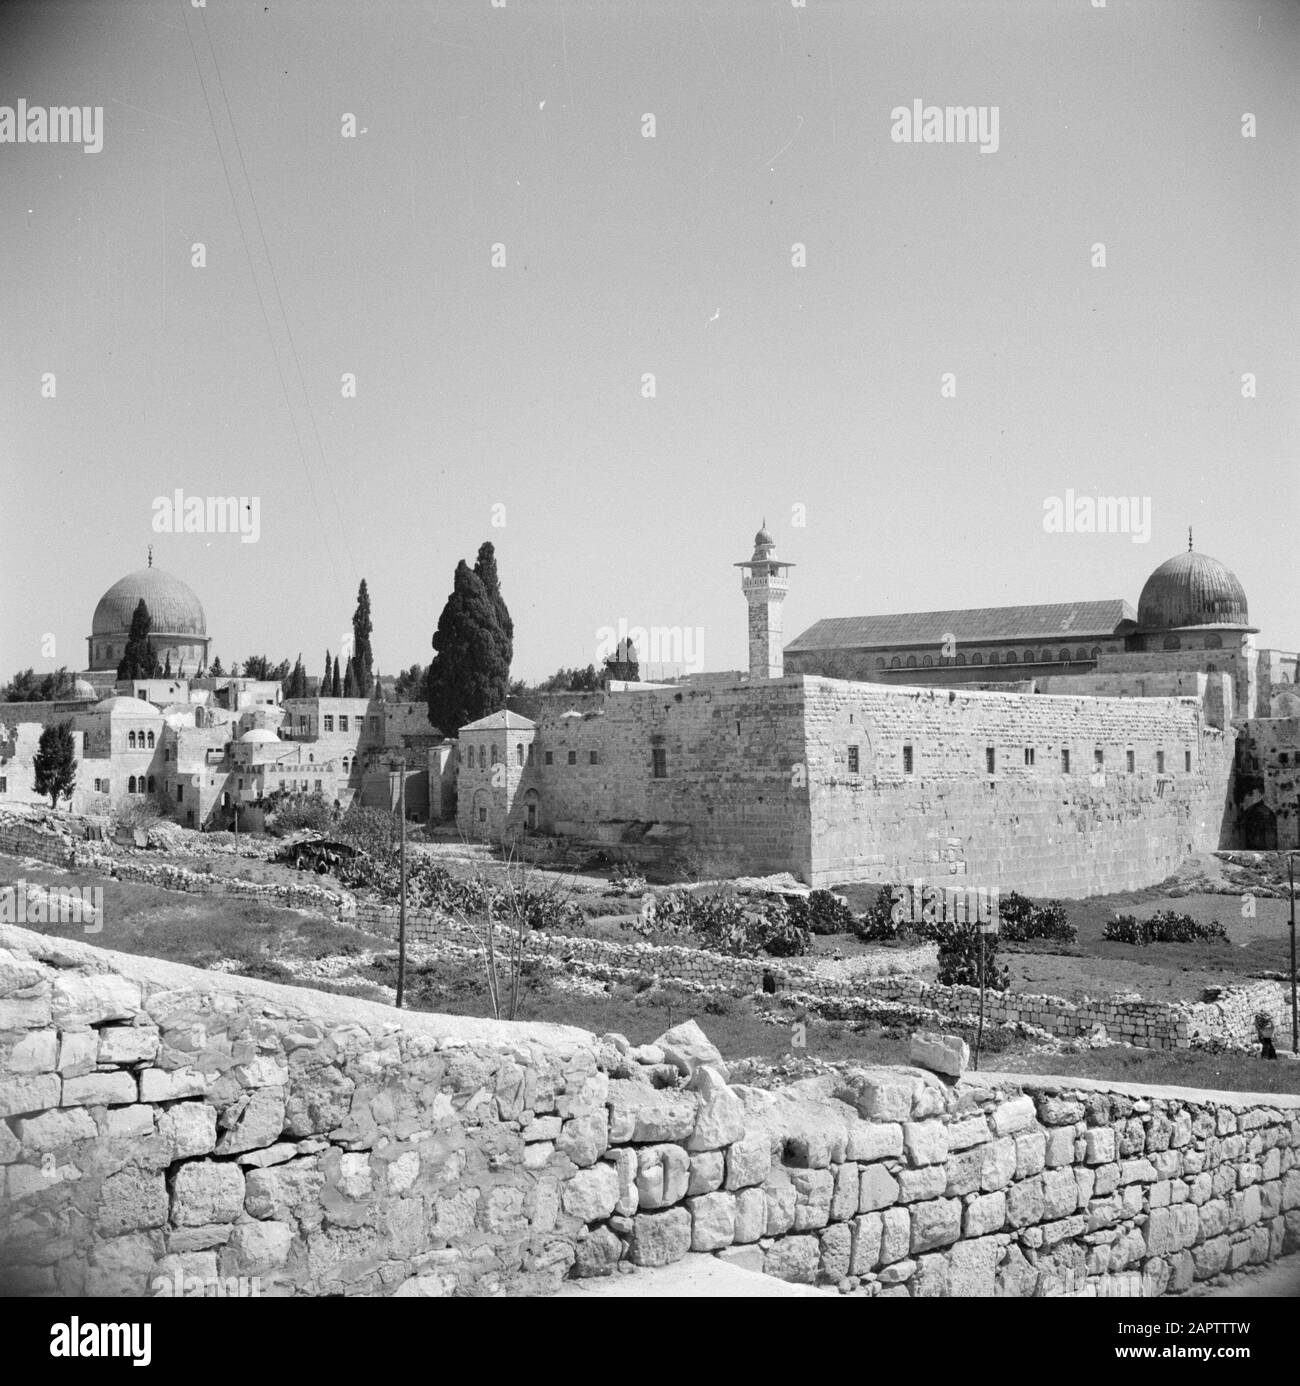 Middle East 1950-1955: Jerusalem  In Jewish Quarter. Al Aqsa mosque in the distance. Temple Square in the foreground Annotation: At the time of the recording, Jerusalem was in Jordan Date: 1950 Location: Israel, Jerusalem, Jordan Keywords: mosques, squares Stock Photo